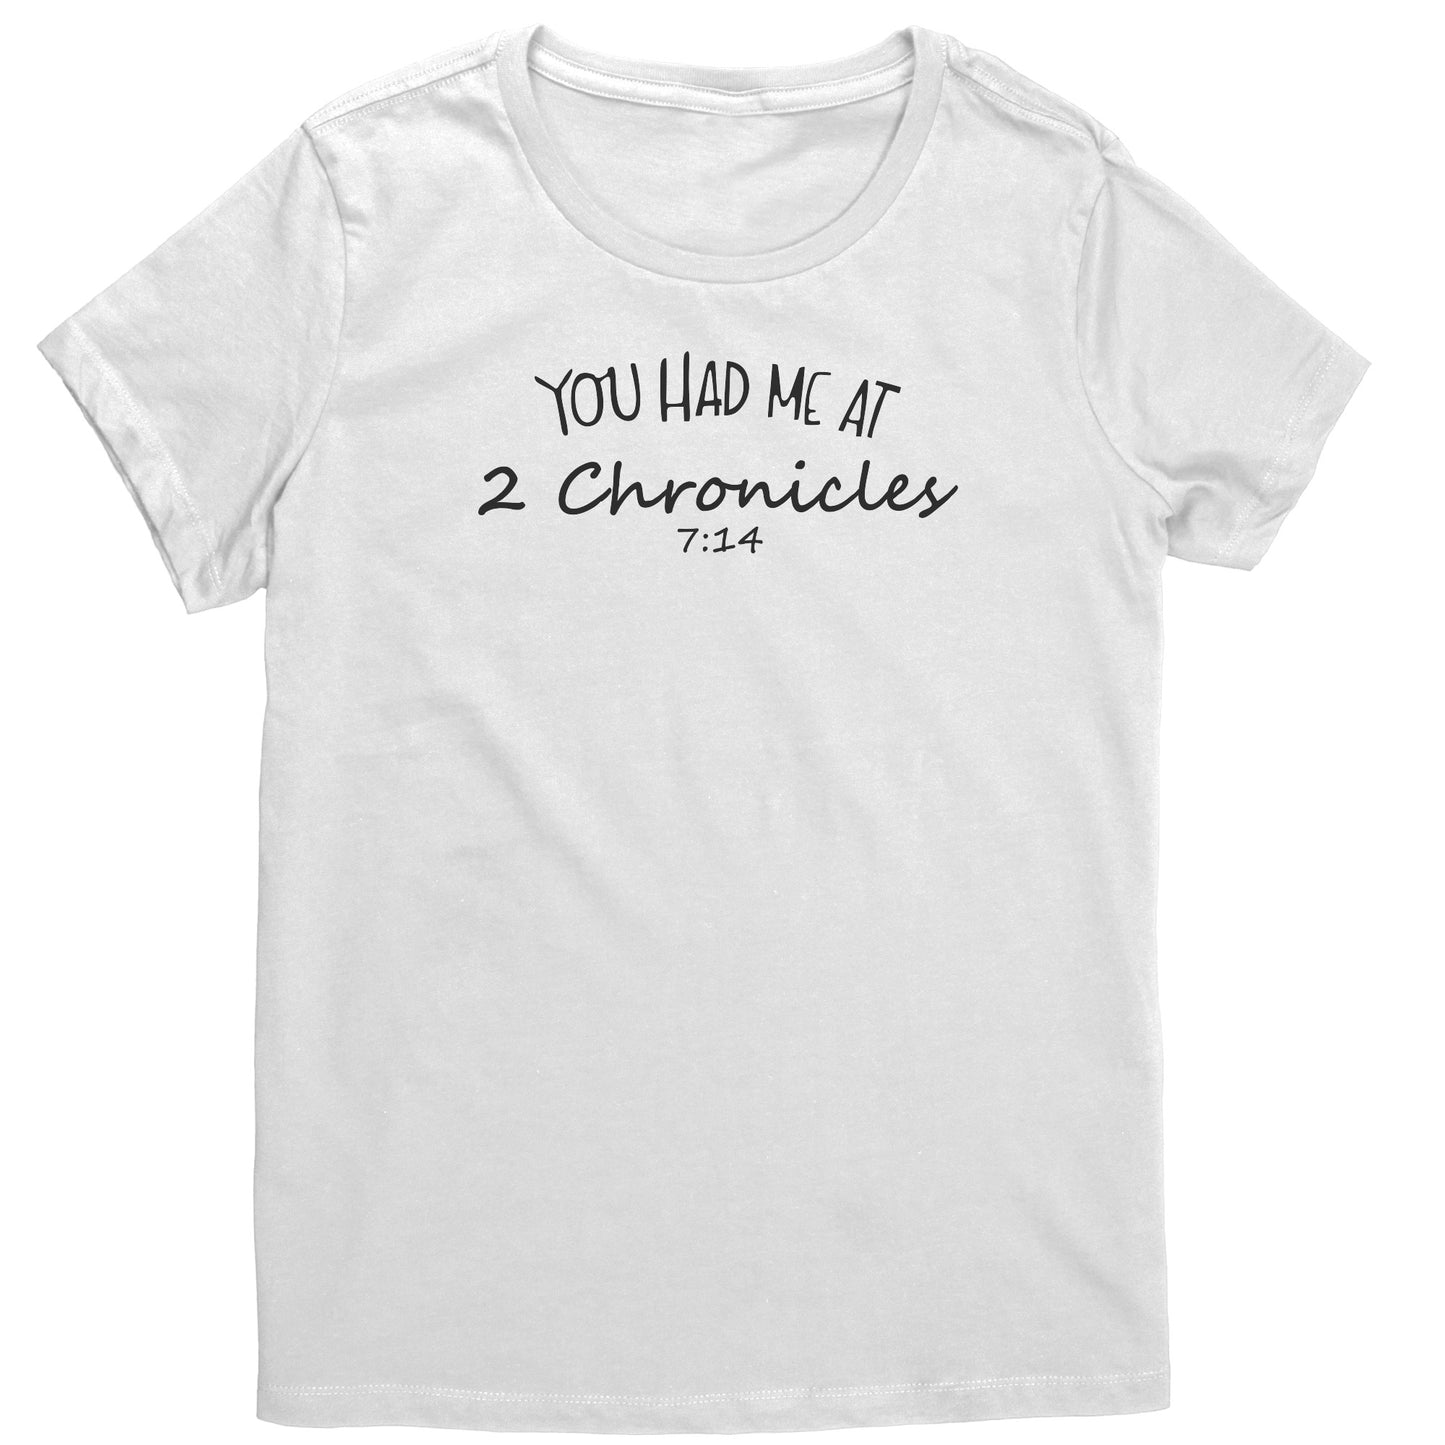 You Had Me At 2 Chronicles 7:14 Women's T-Shirt Part 1